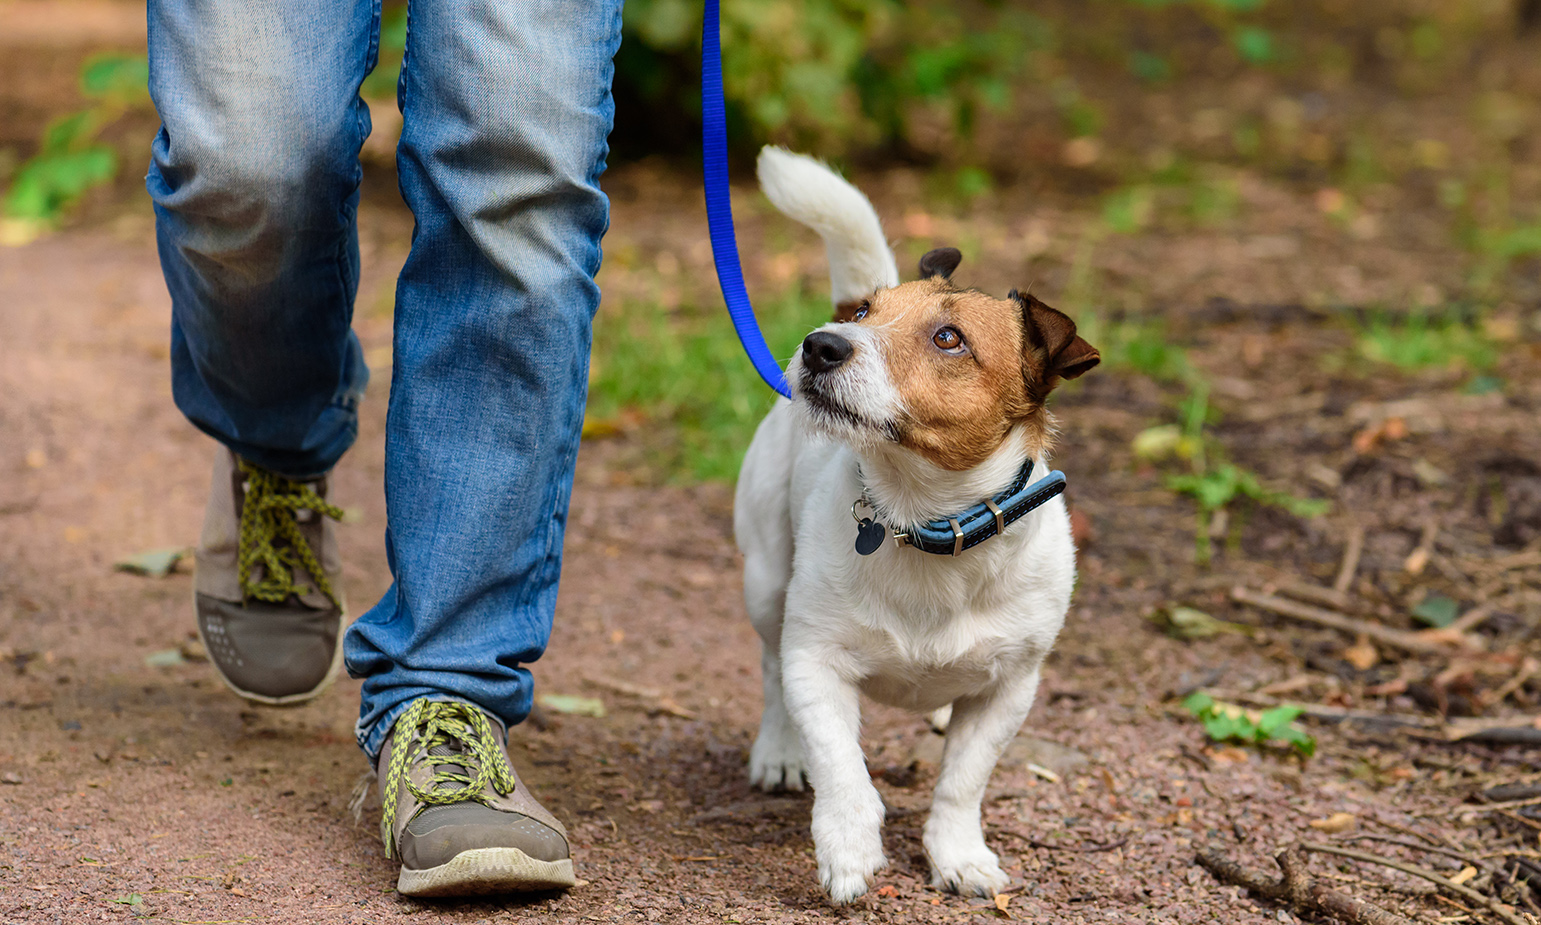 Health Benefits Of Walks With Your Dog - Helpguide.Org